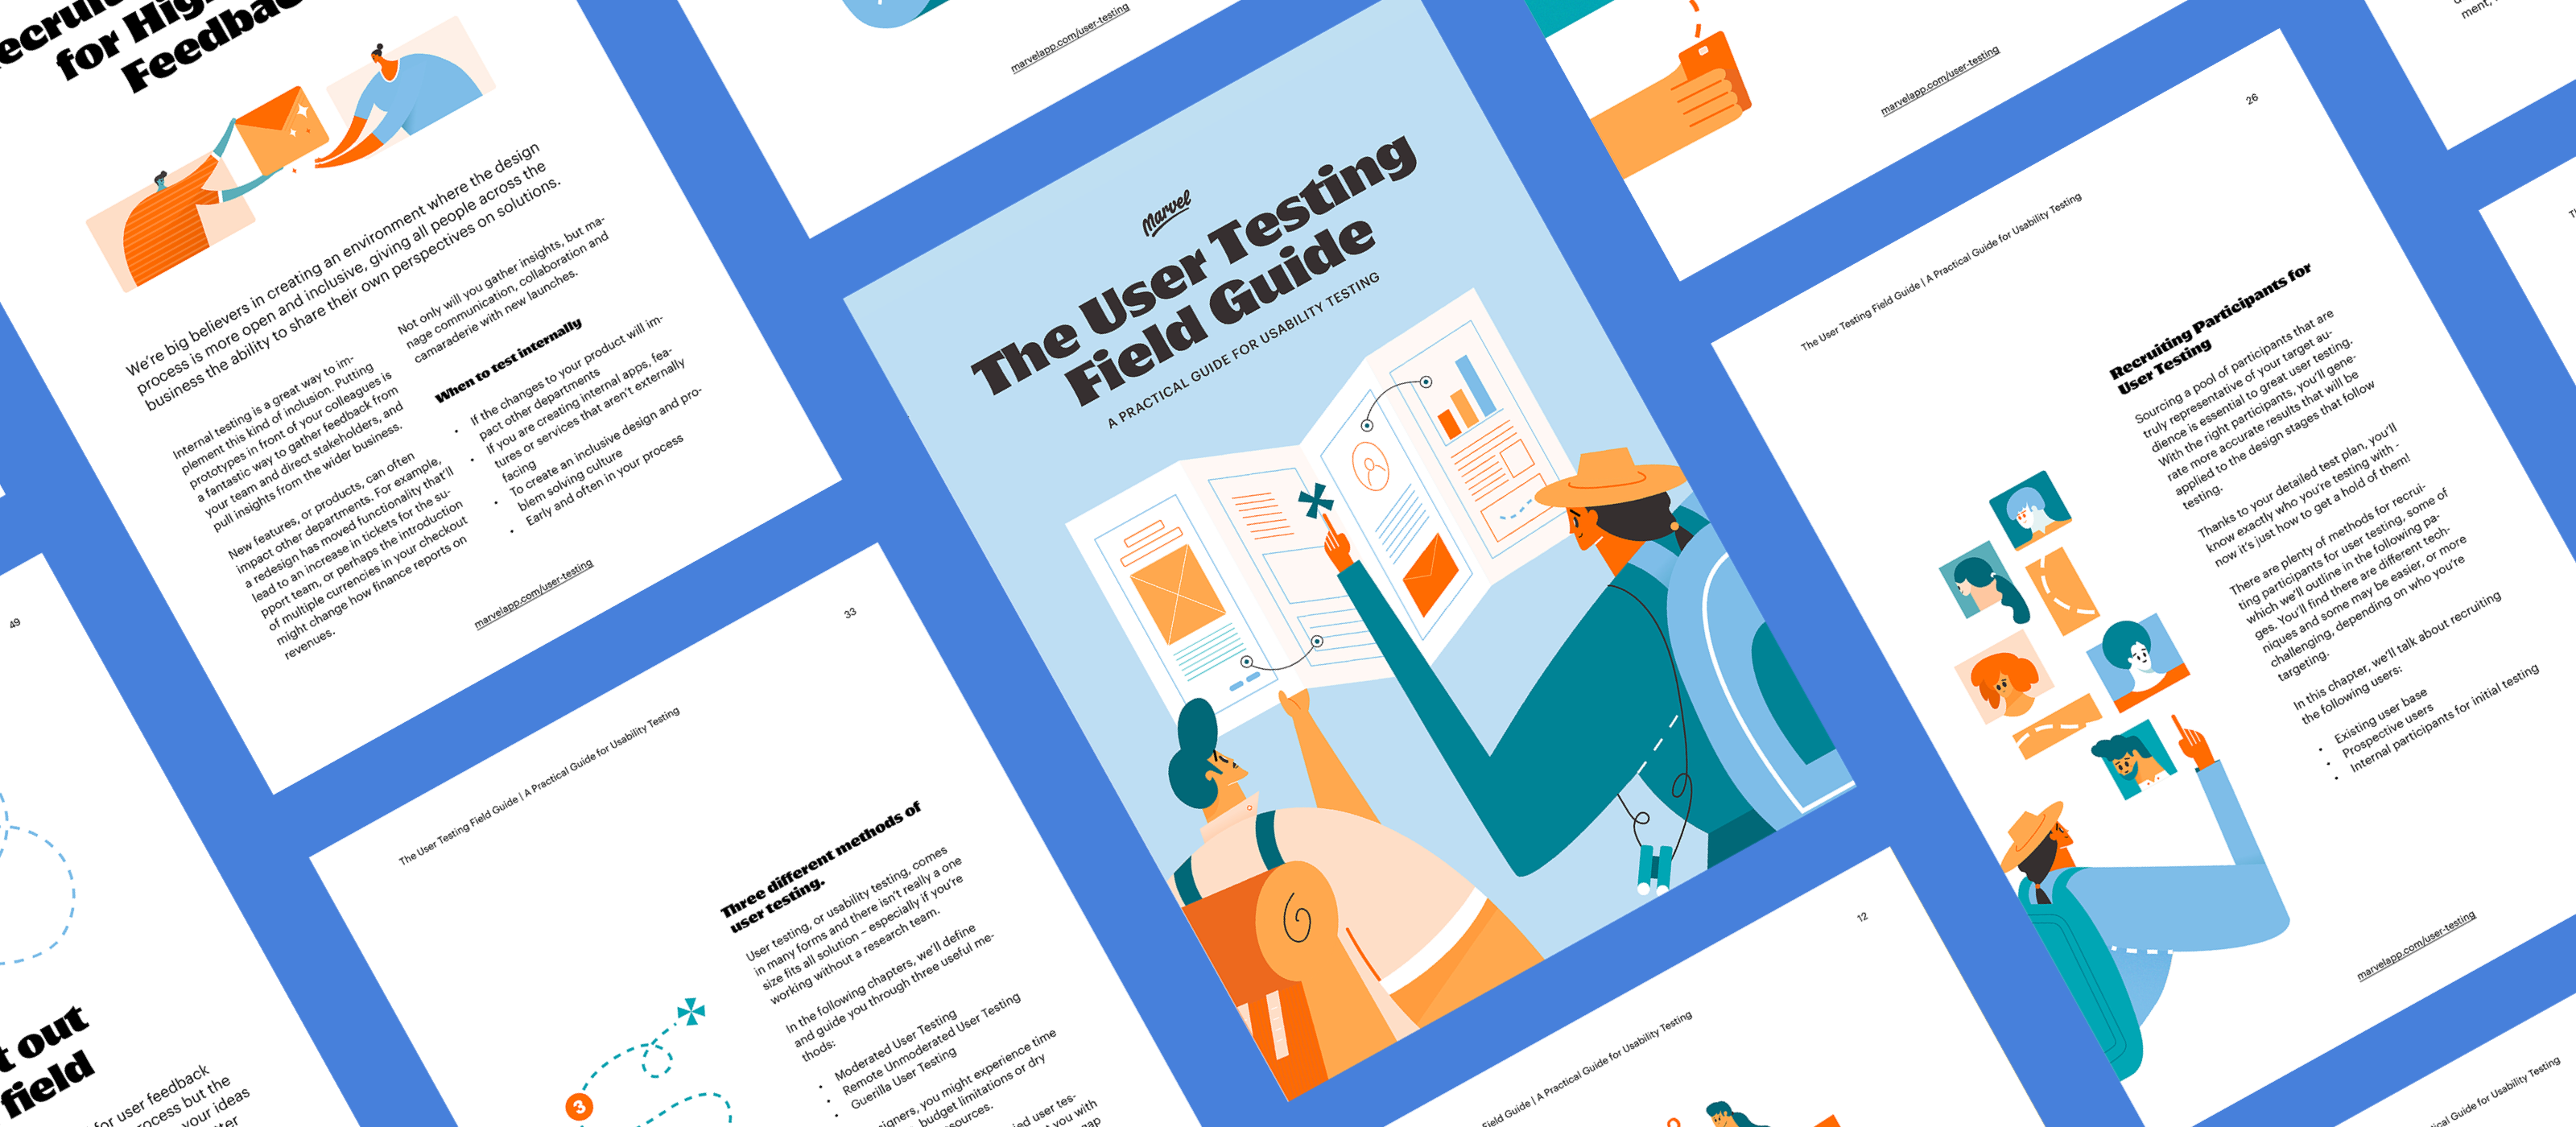 Introducing The User Testing Field Guide